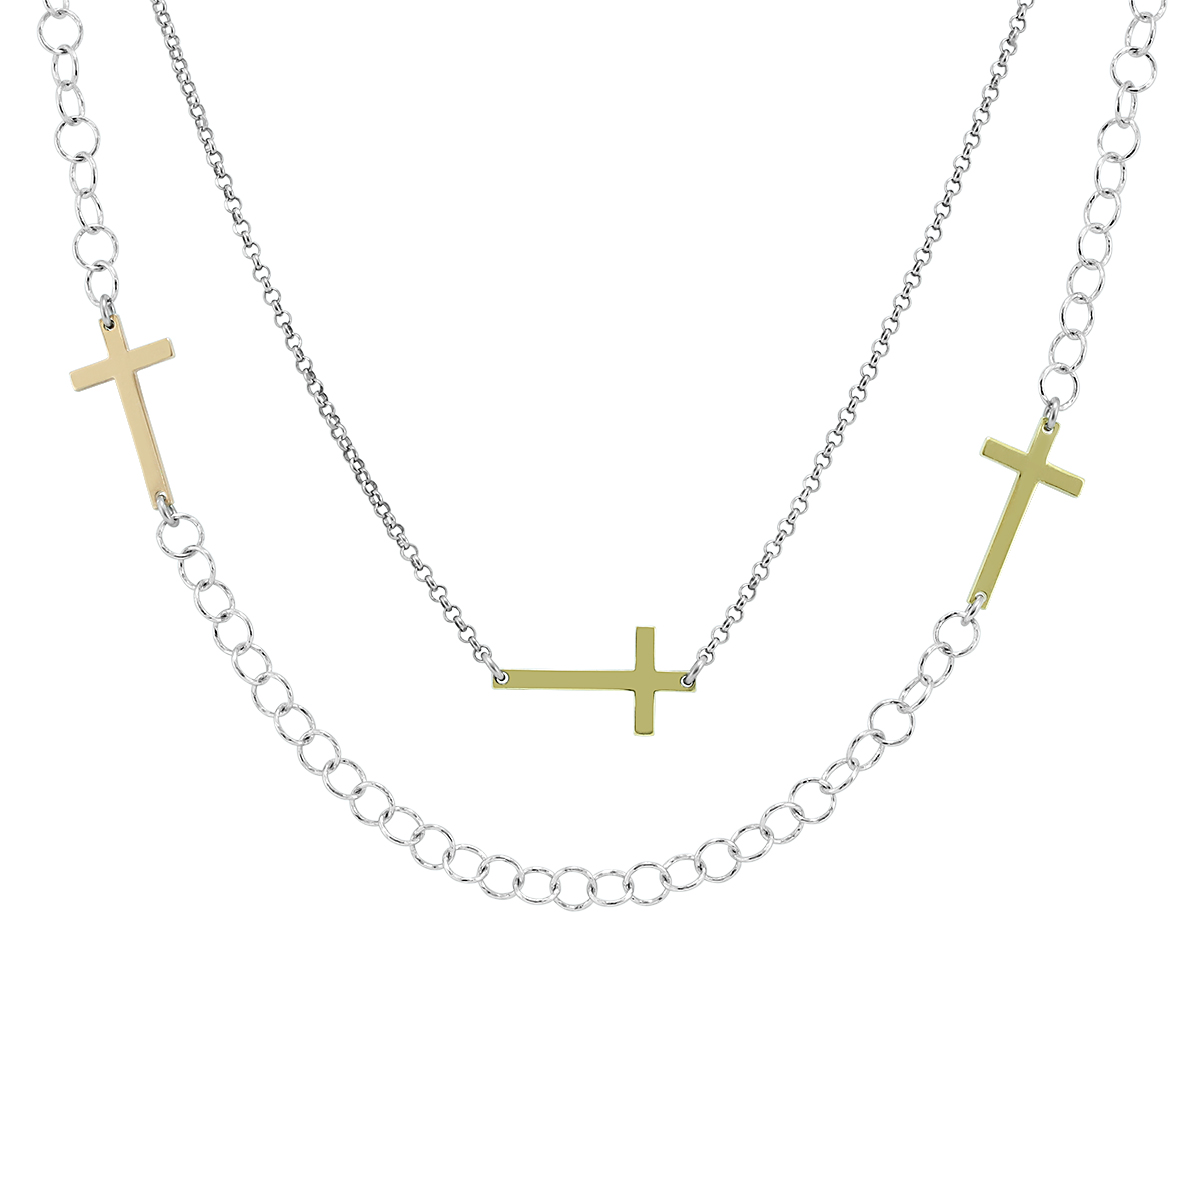 Long 46 inch Cross Necklace in.925 Sterling Silver